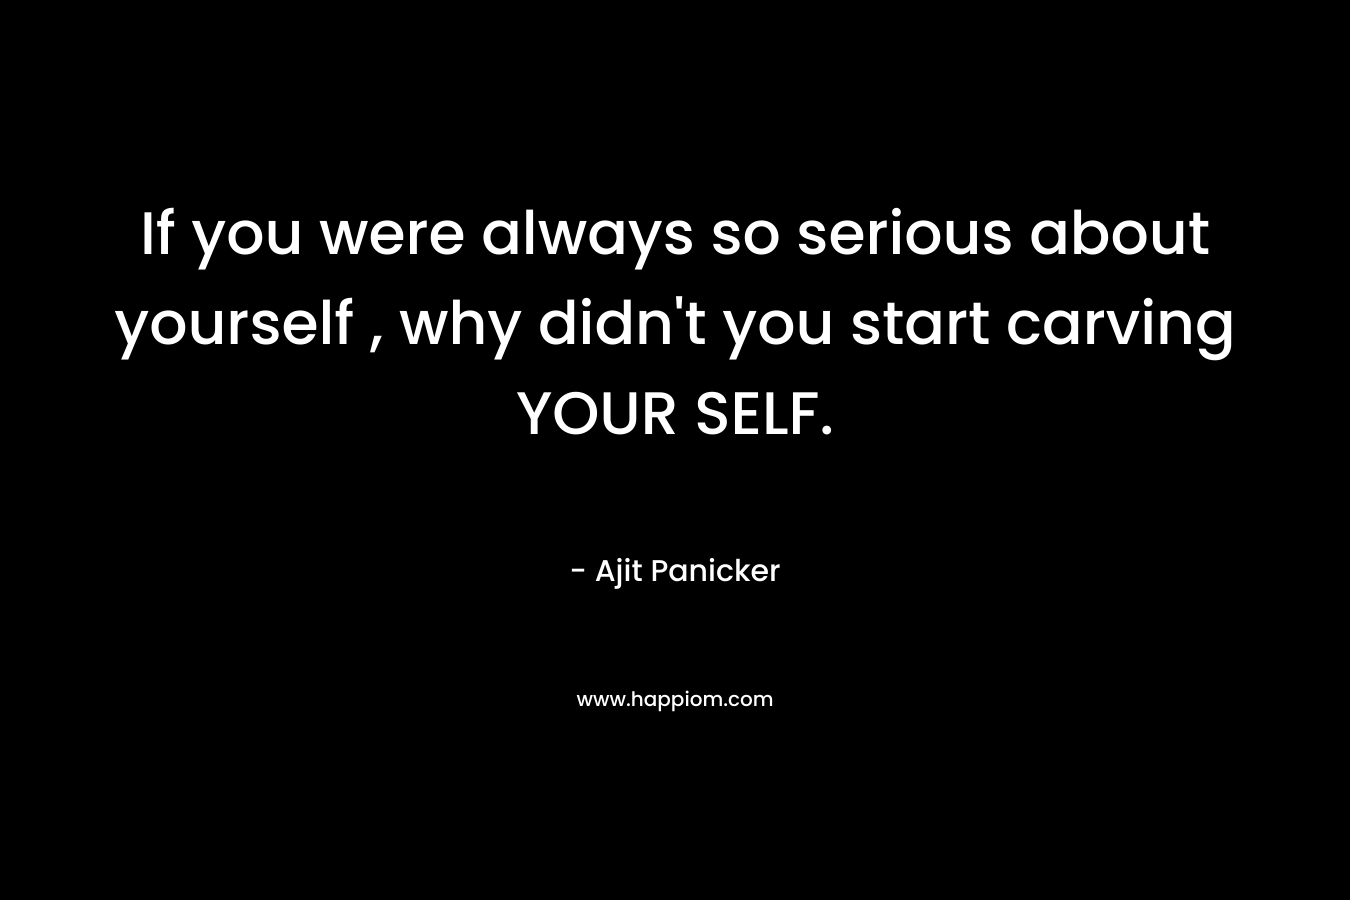 If you were always so serious about yourself , why didn’t you start carving YOUR SELF. – Ajit Panicker